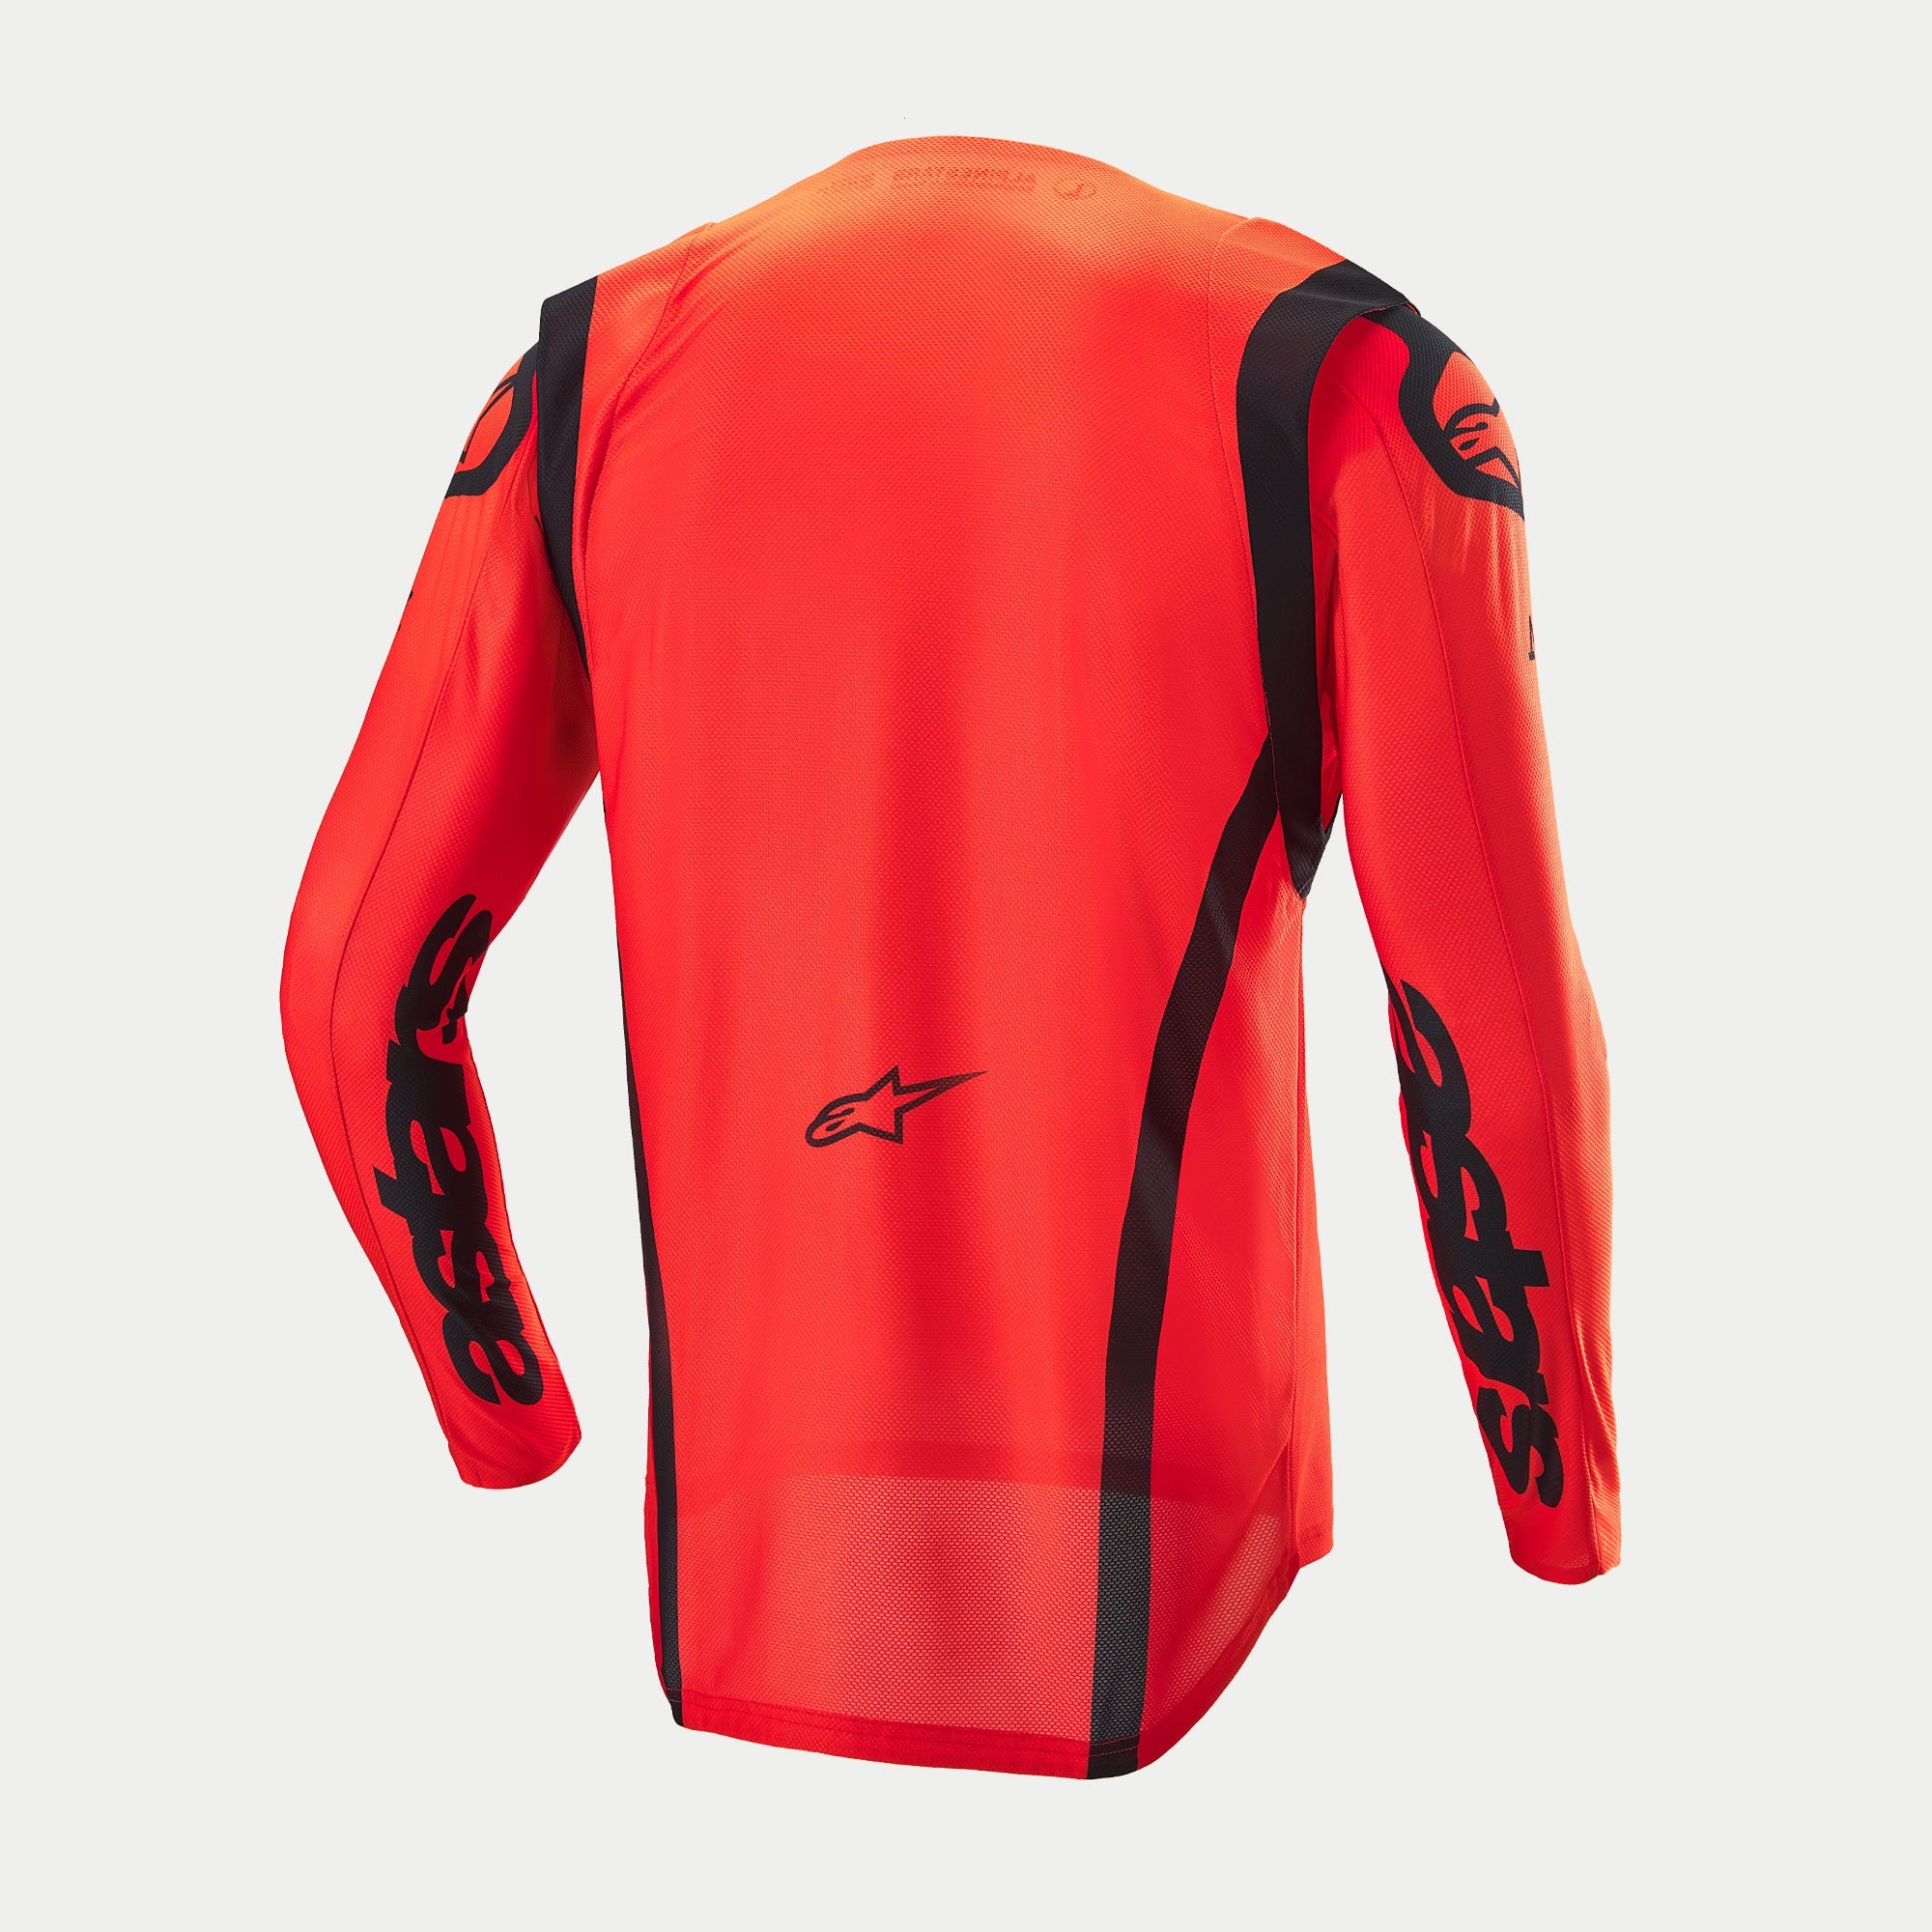 Limited Edition Supertech Ember Jersey